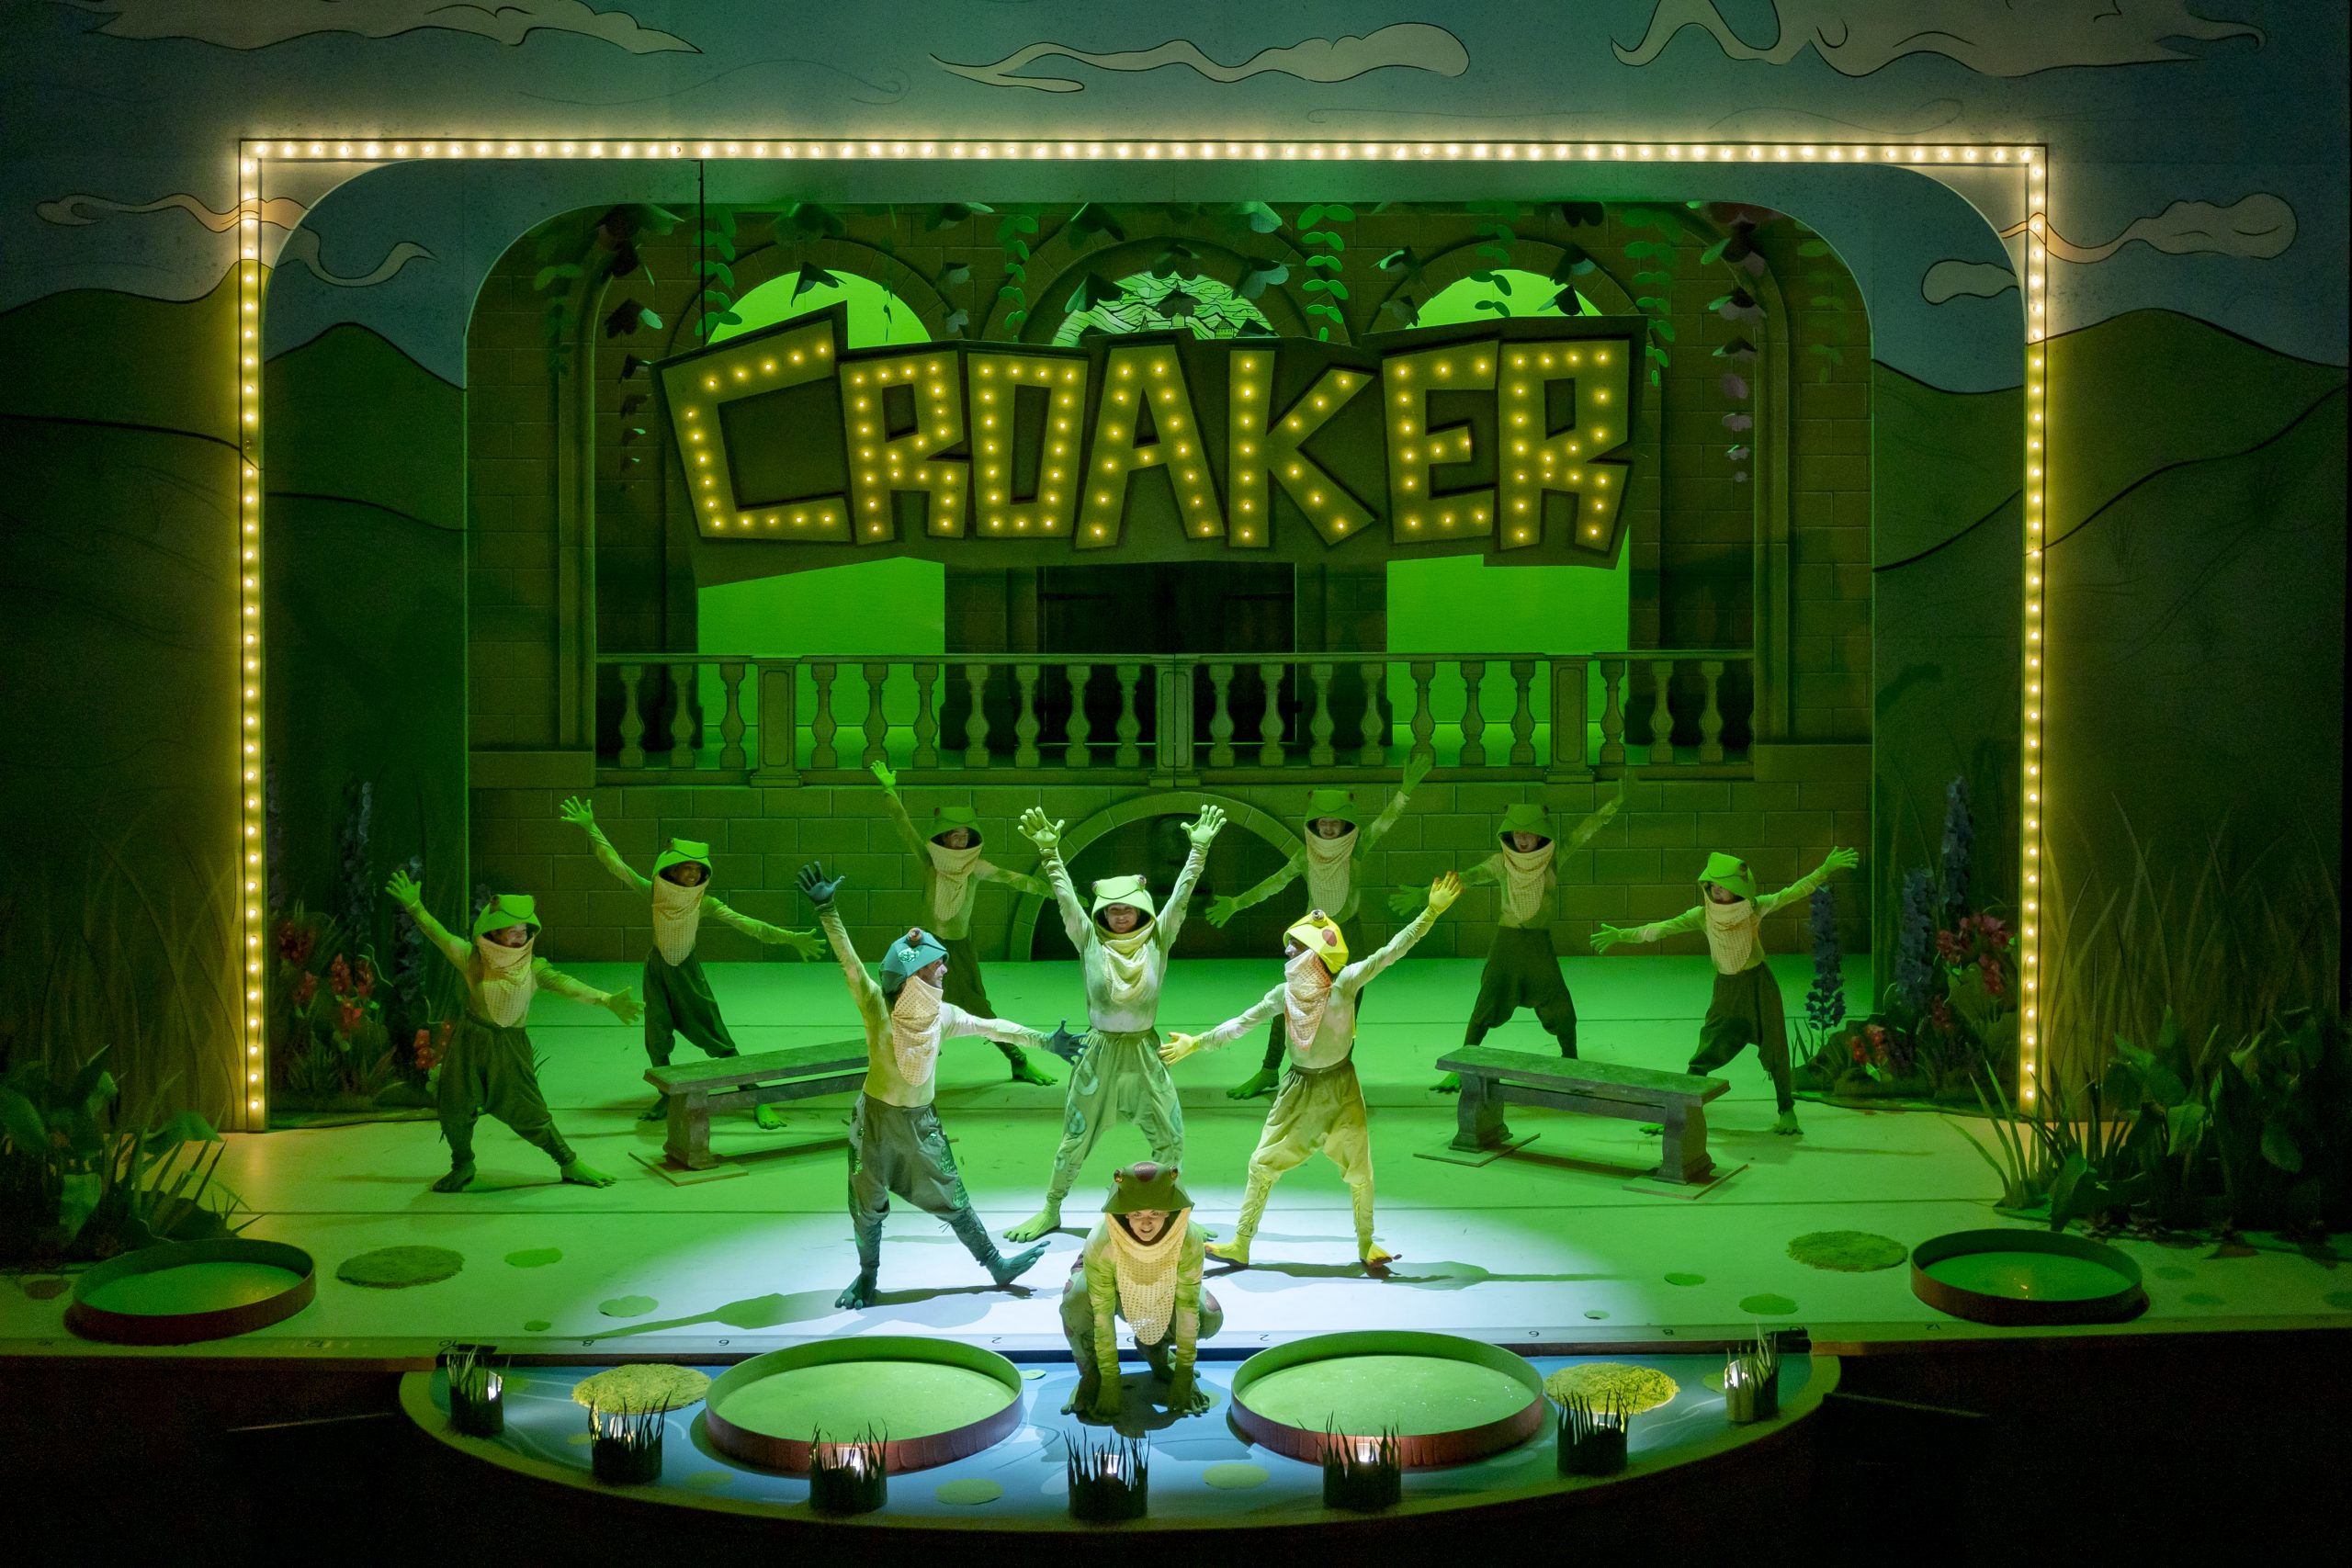 Croaker marquee sign with green set and performers in frog costumes